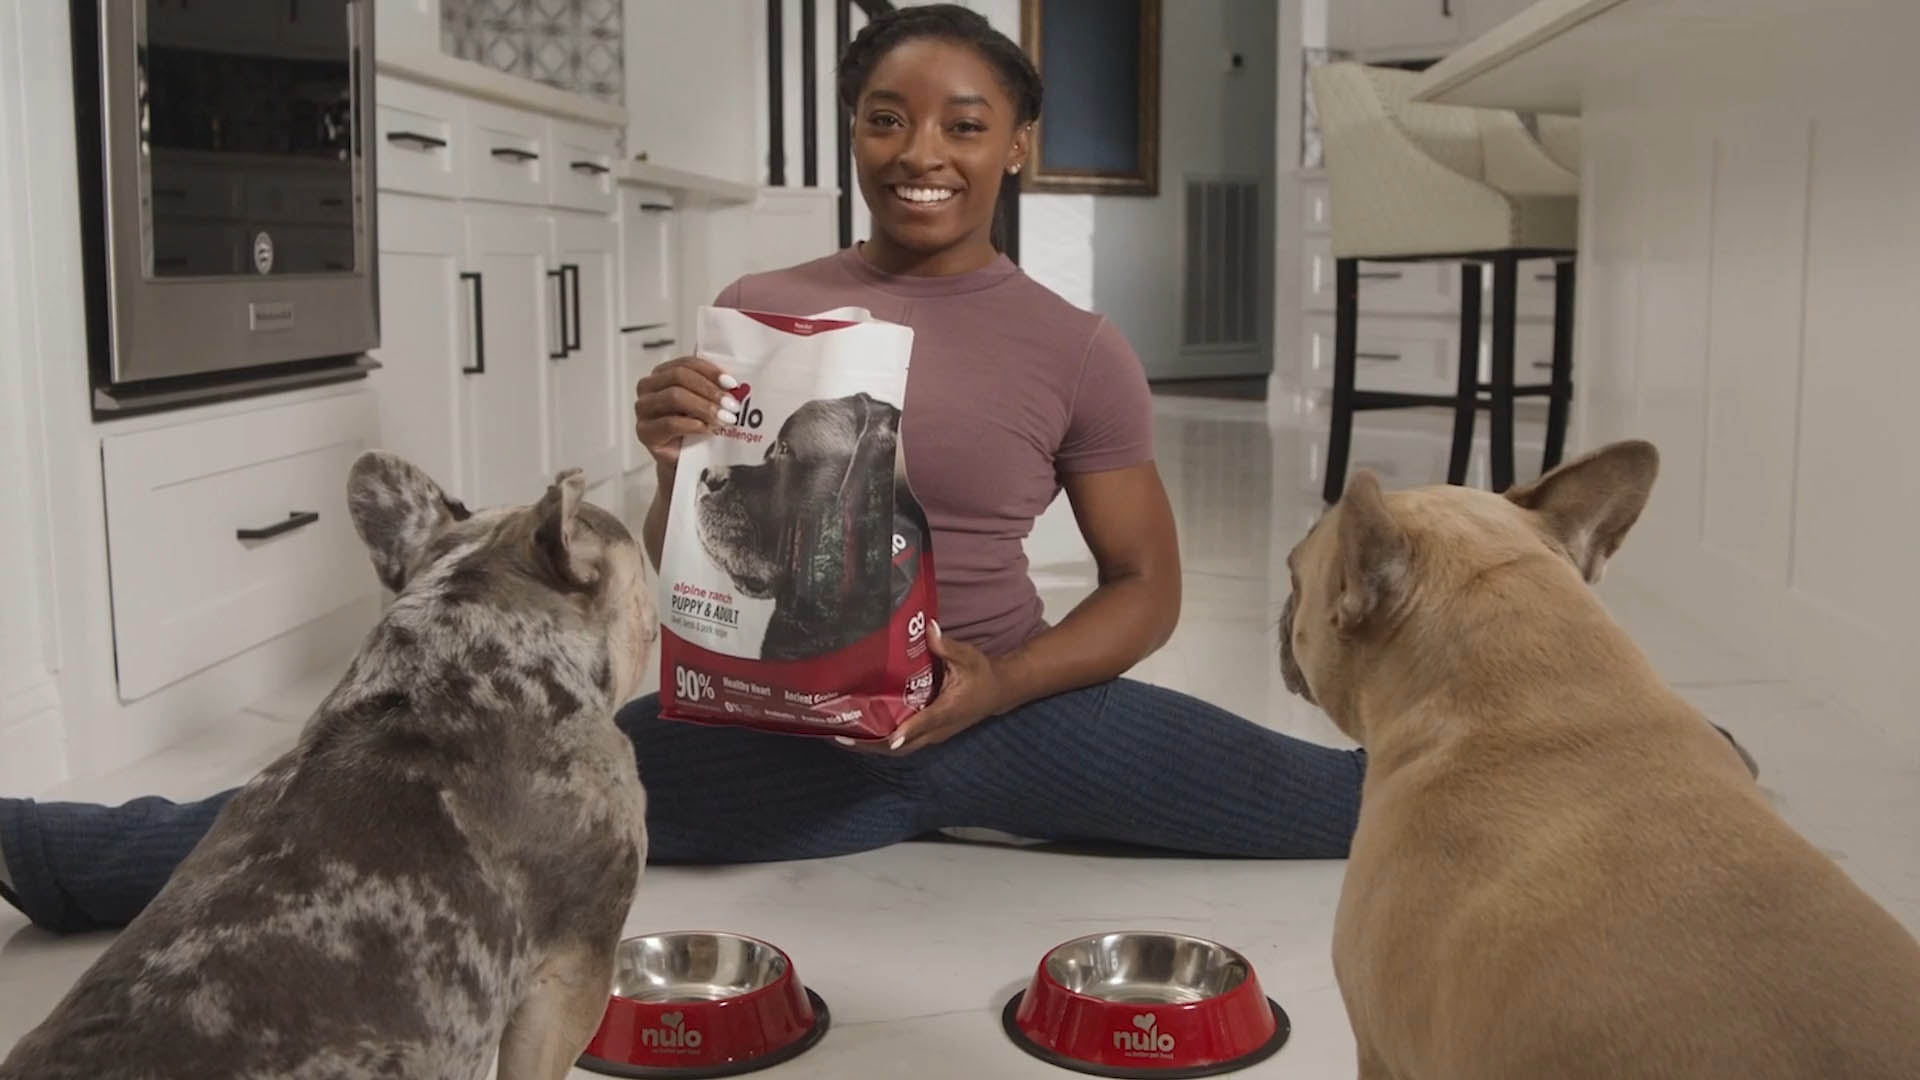 Simone Biles and her French Bulldogs team up with Nulo pet food on a new national campaign to "Fuel Incredible" moments. The campaign celebrates the special bond between parents and their pets and highlights Nulo’s mission to fuel a pet nutrition upgrade. Biles will front the campaign in her role as the newest ambassador for the Nulo brand.